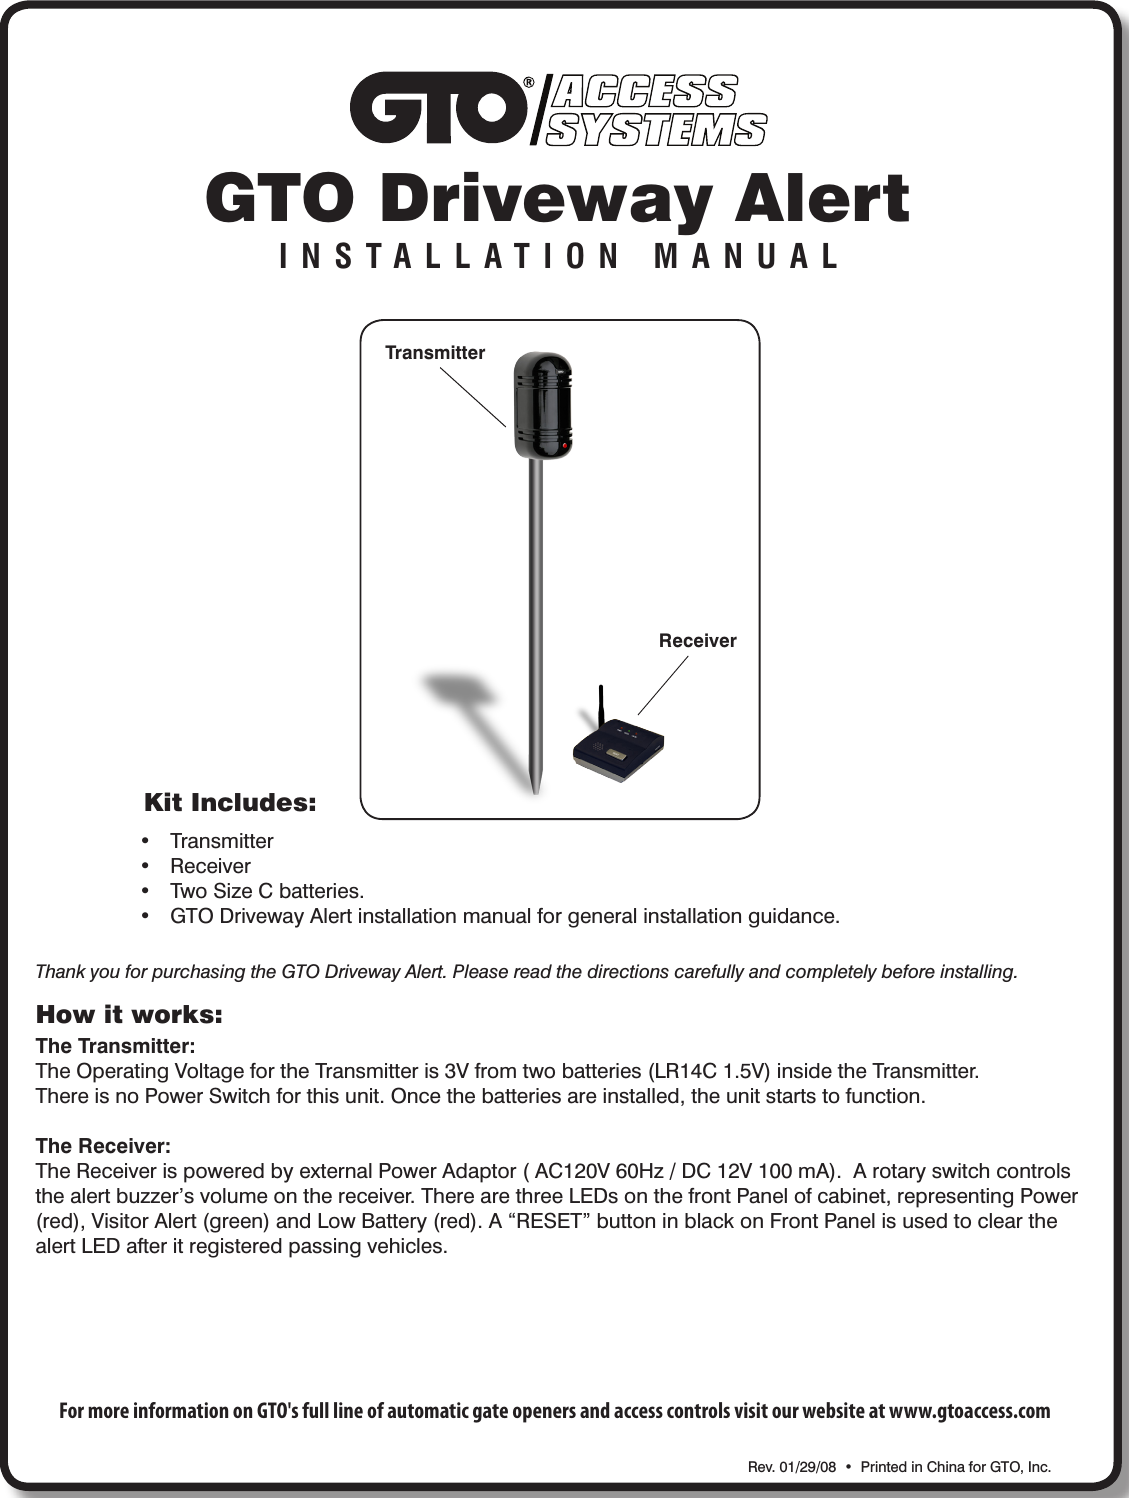 ACCESSSYSTEMSGTO Driveway AlertINSTALLATION MANUALKit Includes:• Transmitter• Receiver• TwoSizeCbatteries.• GTODrivewayAlertinstallationmanualforgeneralinstallationguidance.Rev.01/29/08•PrintedinChinaforGTO,Inc.TransmitterReceiverHow it works:The Transmitter:TheOperatingVoltagefortheTransmitteris3Vfromtwobatteries(LR14C1.5V)insidetheTransmitter.ThereisnoPowerSwitchforthisunit.Oncethebatteriesareinstalled,theunitstartstofunction.The Receiver:TheReceiverispoweredbyexternalPowerAdaptor(AC120V60Hz/DC12V100mA).Arotaryswitchcontrolsthealertbuzzer’svolumeonthereceiver.TherearethreeLEDsonthefrontPanelofcabinet,representingPower(red),VisitorAlert(green)andLowBattery(red).A“RESET”buttoninblackonFrontPanelisusedtoclearthealertLEDafteritregisteredpassingvehicles.Thank you for purchasing the GTO Driveway Alert. Please read the directions carefully and completely before installing.For more information on GTO&apos;s full line of automatic gate openers and access controls visit our website at www.gtoaccess.com